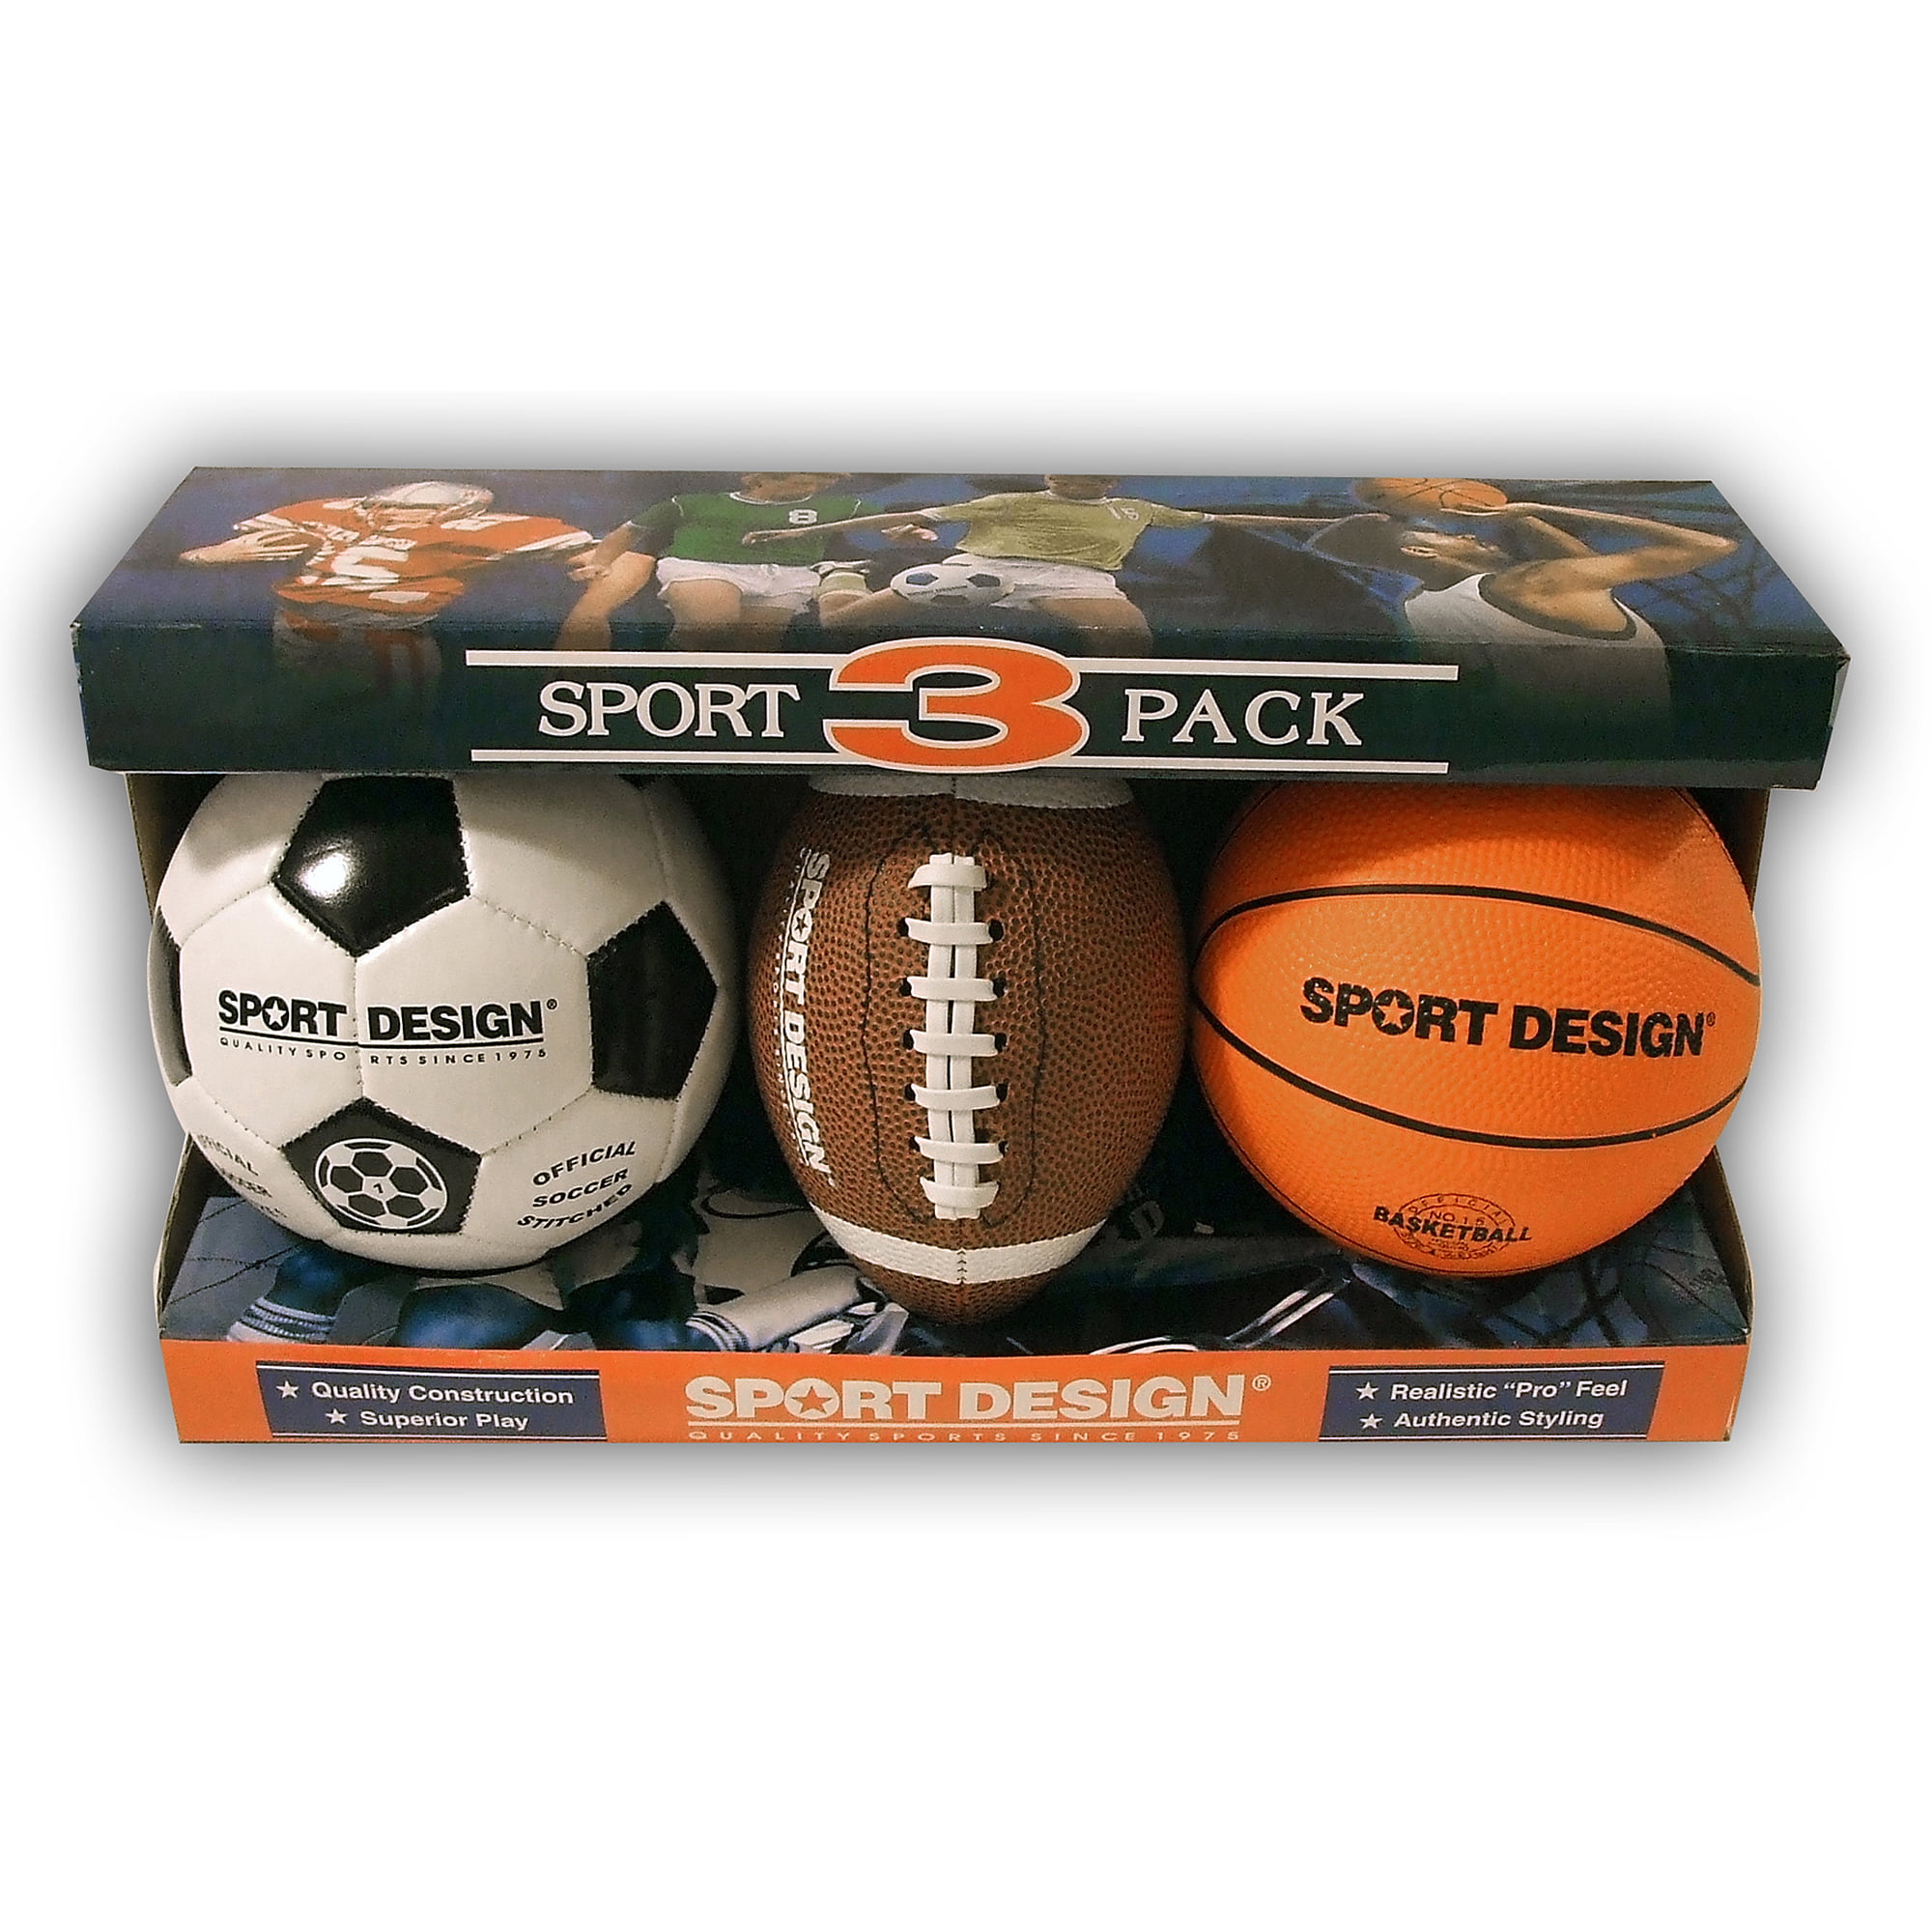 SoftTech Black Boa BEST MULTISPORT INDOOR BALLS EVER Soccer Basketball Volleyball and More HAND BUILT IN USA Play Makers USA 